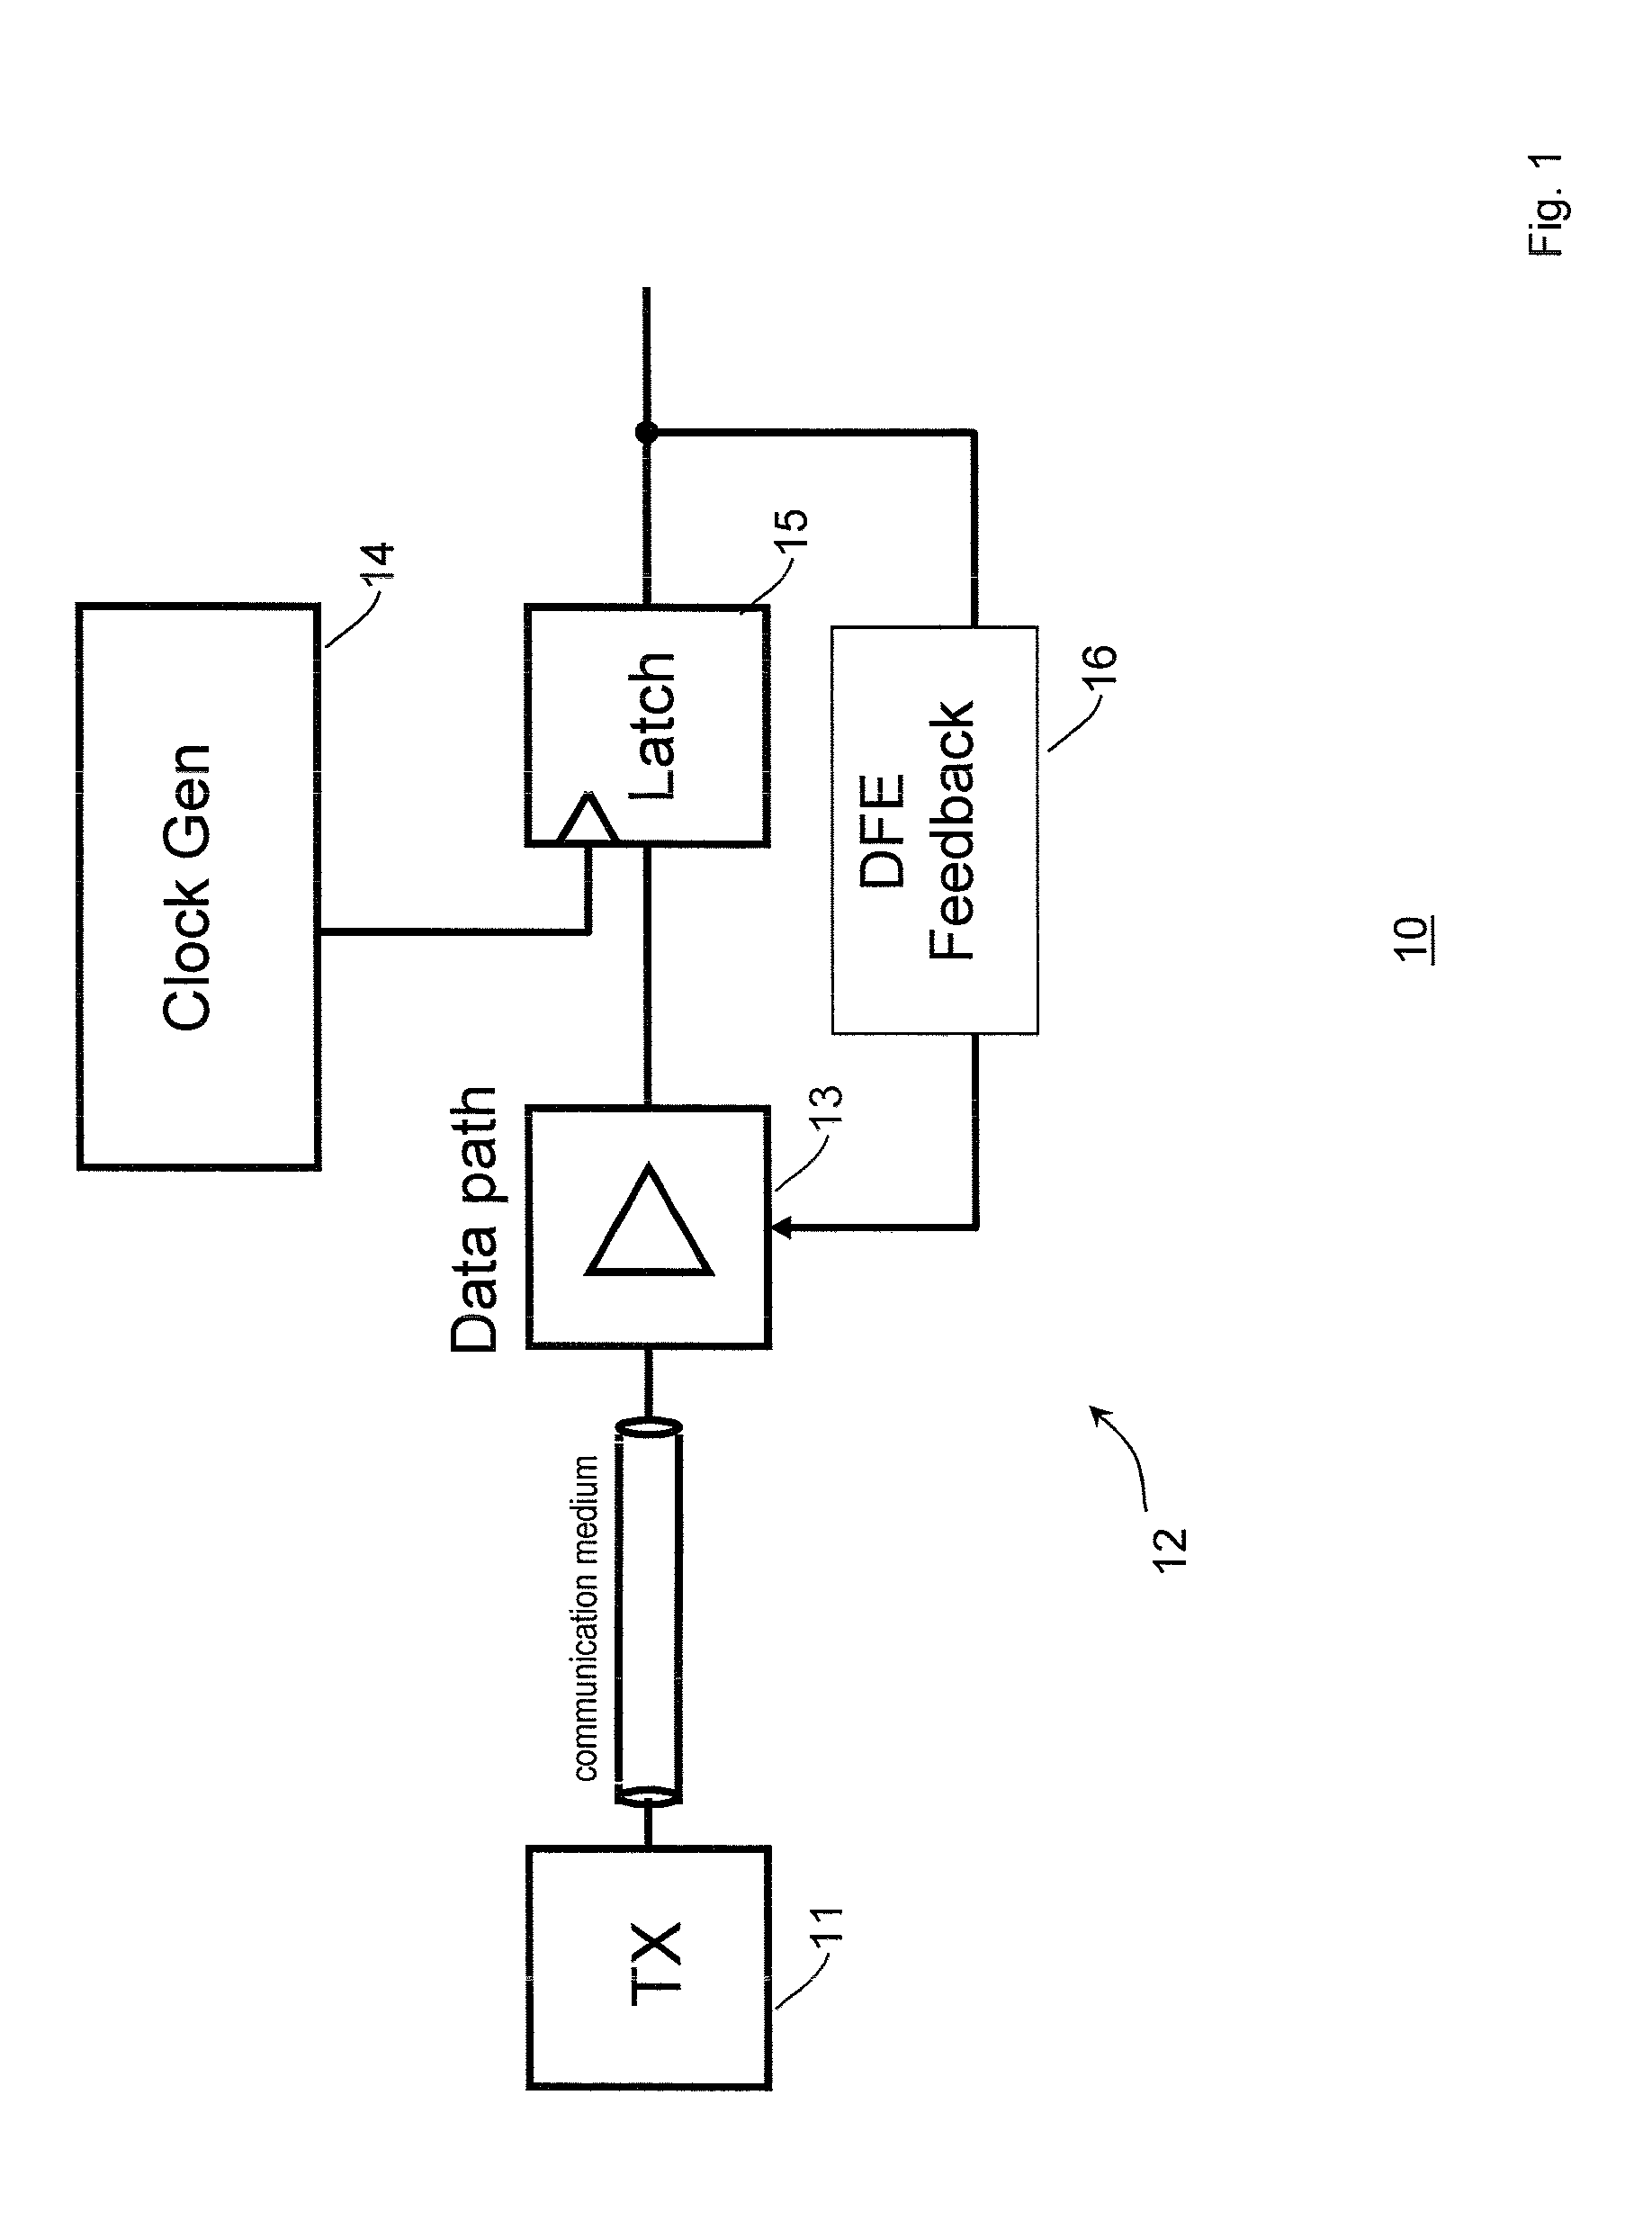 Method and system for low-power integrating decision feedback equalizer with fast switched-capacitor feed forward path